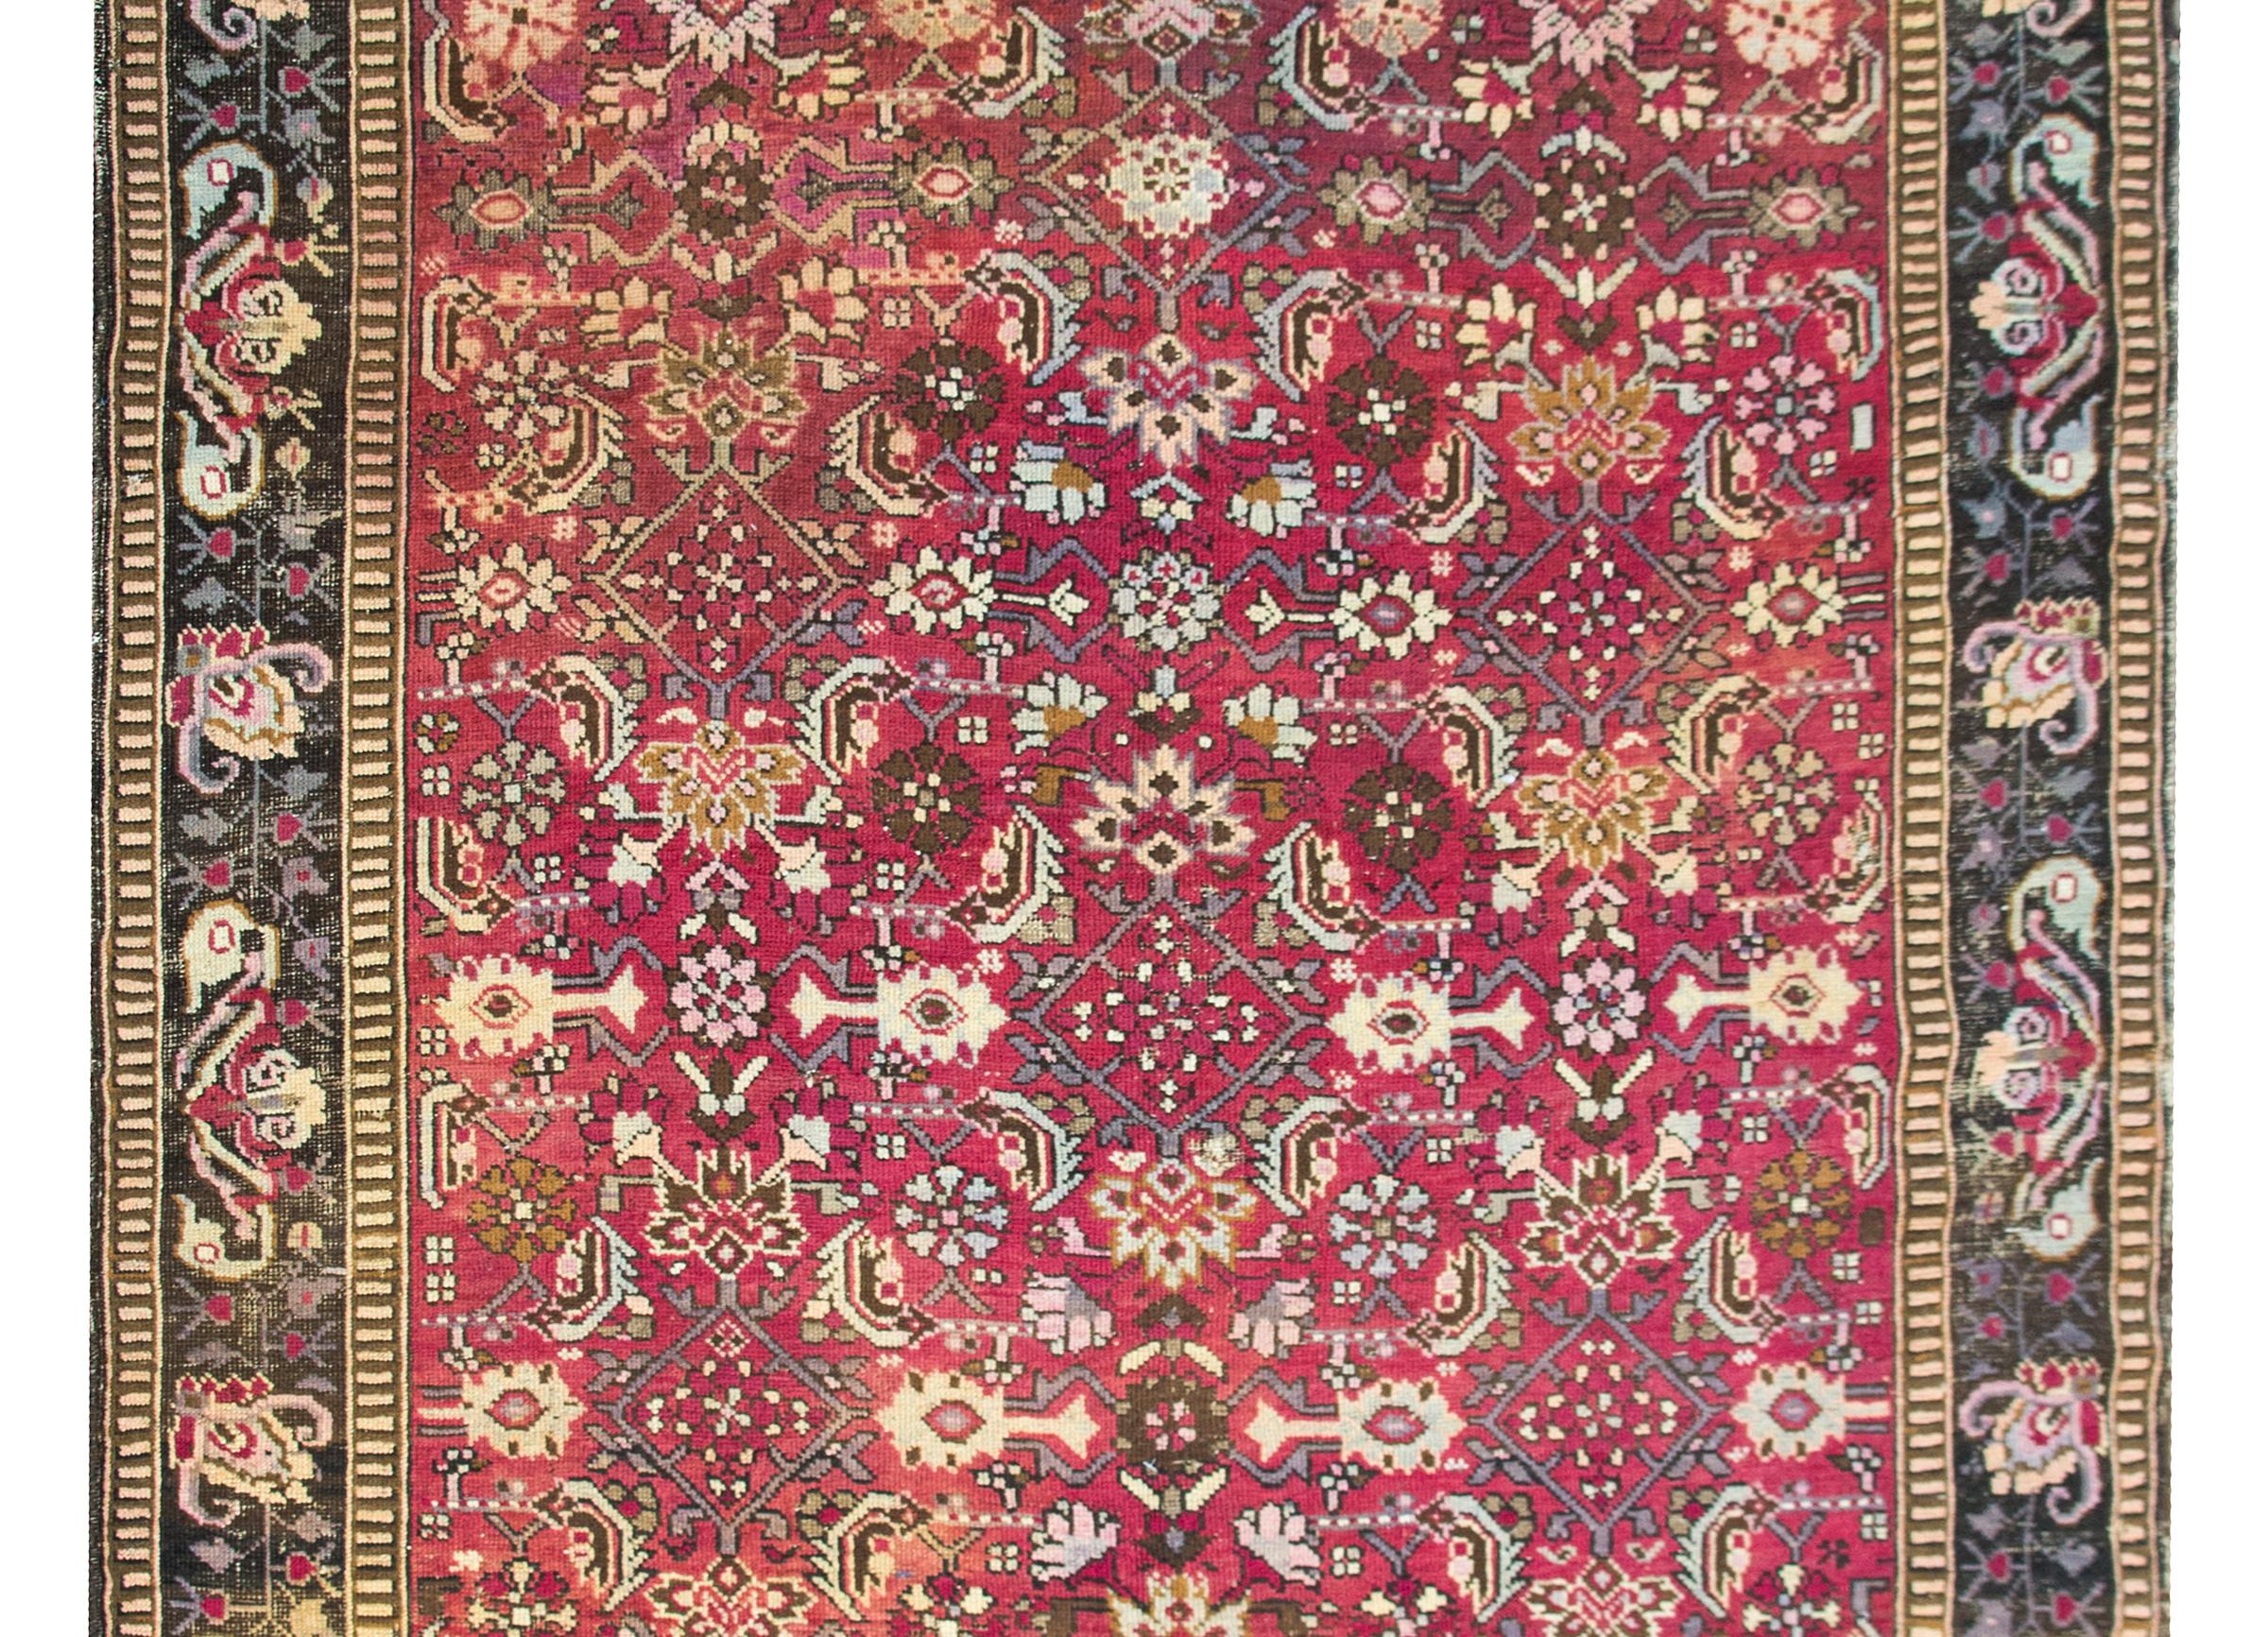 A fantastic early 20th century Caucasian Karabagh rug with an all-over trellis stylized leaf and flower pattern woven in pinks, creams, light indigos, gray, and brown wool set against a cranberry background, and surrounded by a border with more